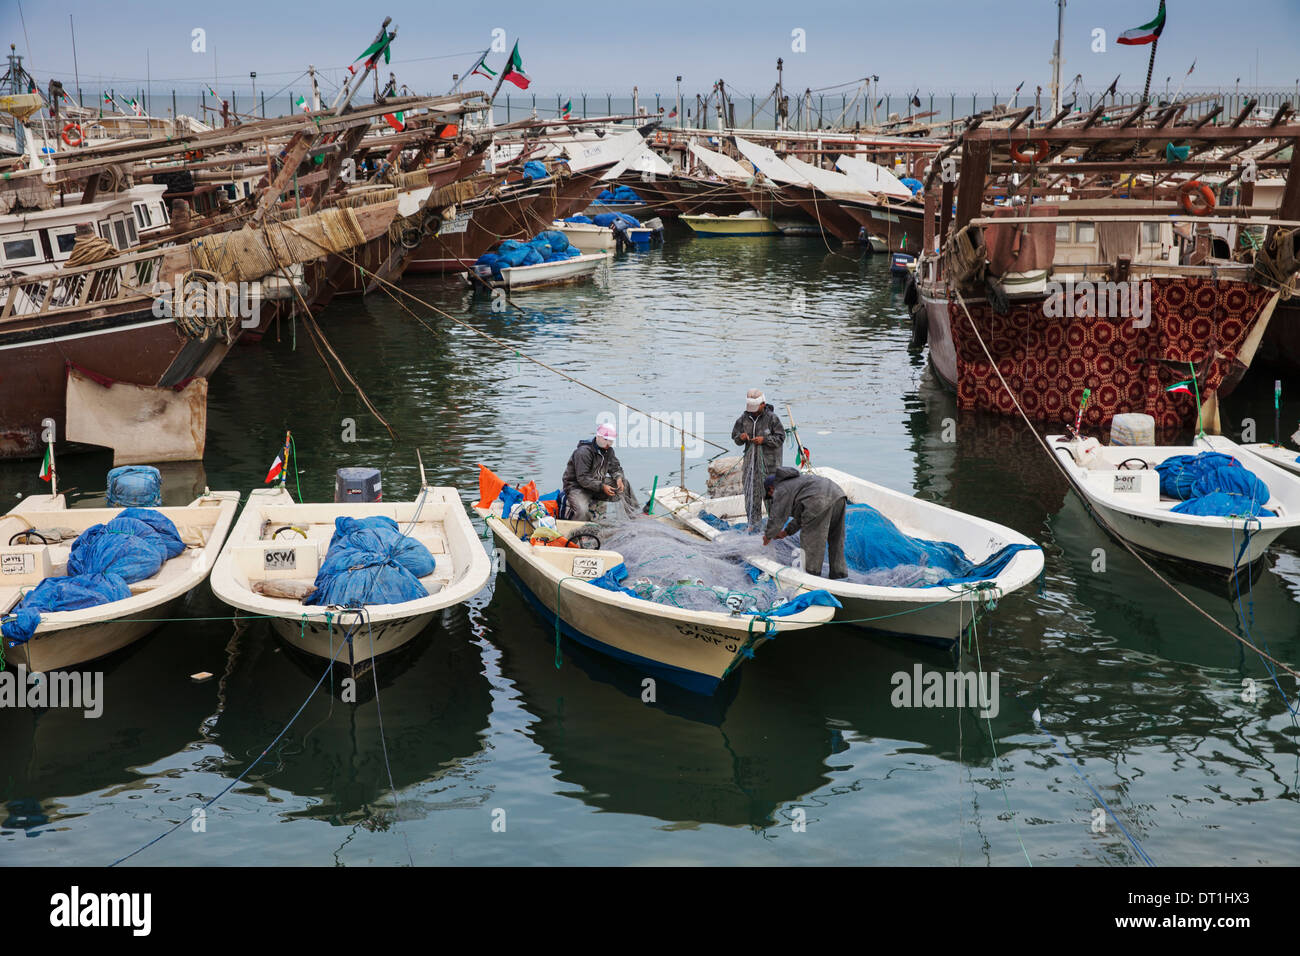 Fishing boats and dhows in the Old Ships port, Kuwait City, Kuwait, Middle East Stock Photo